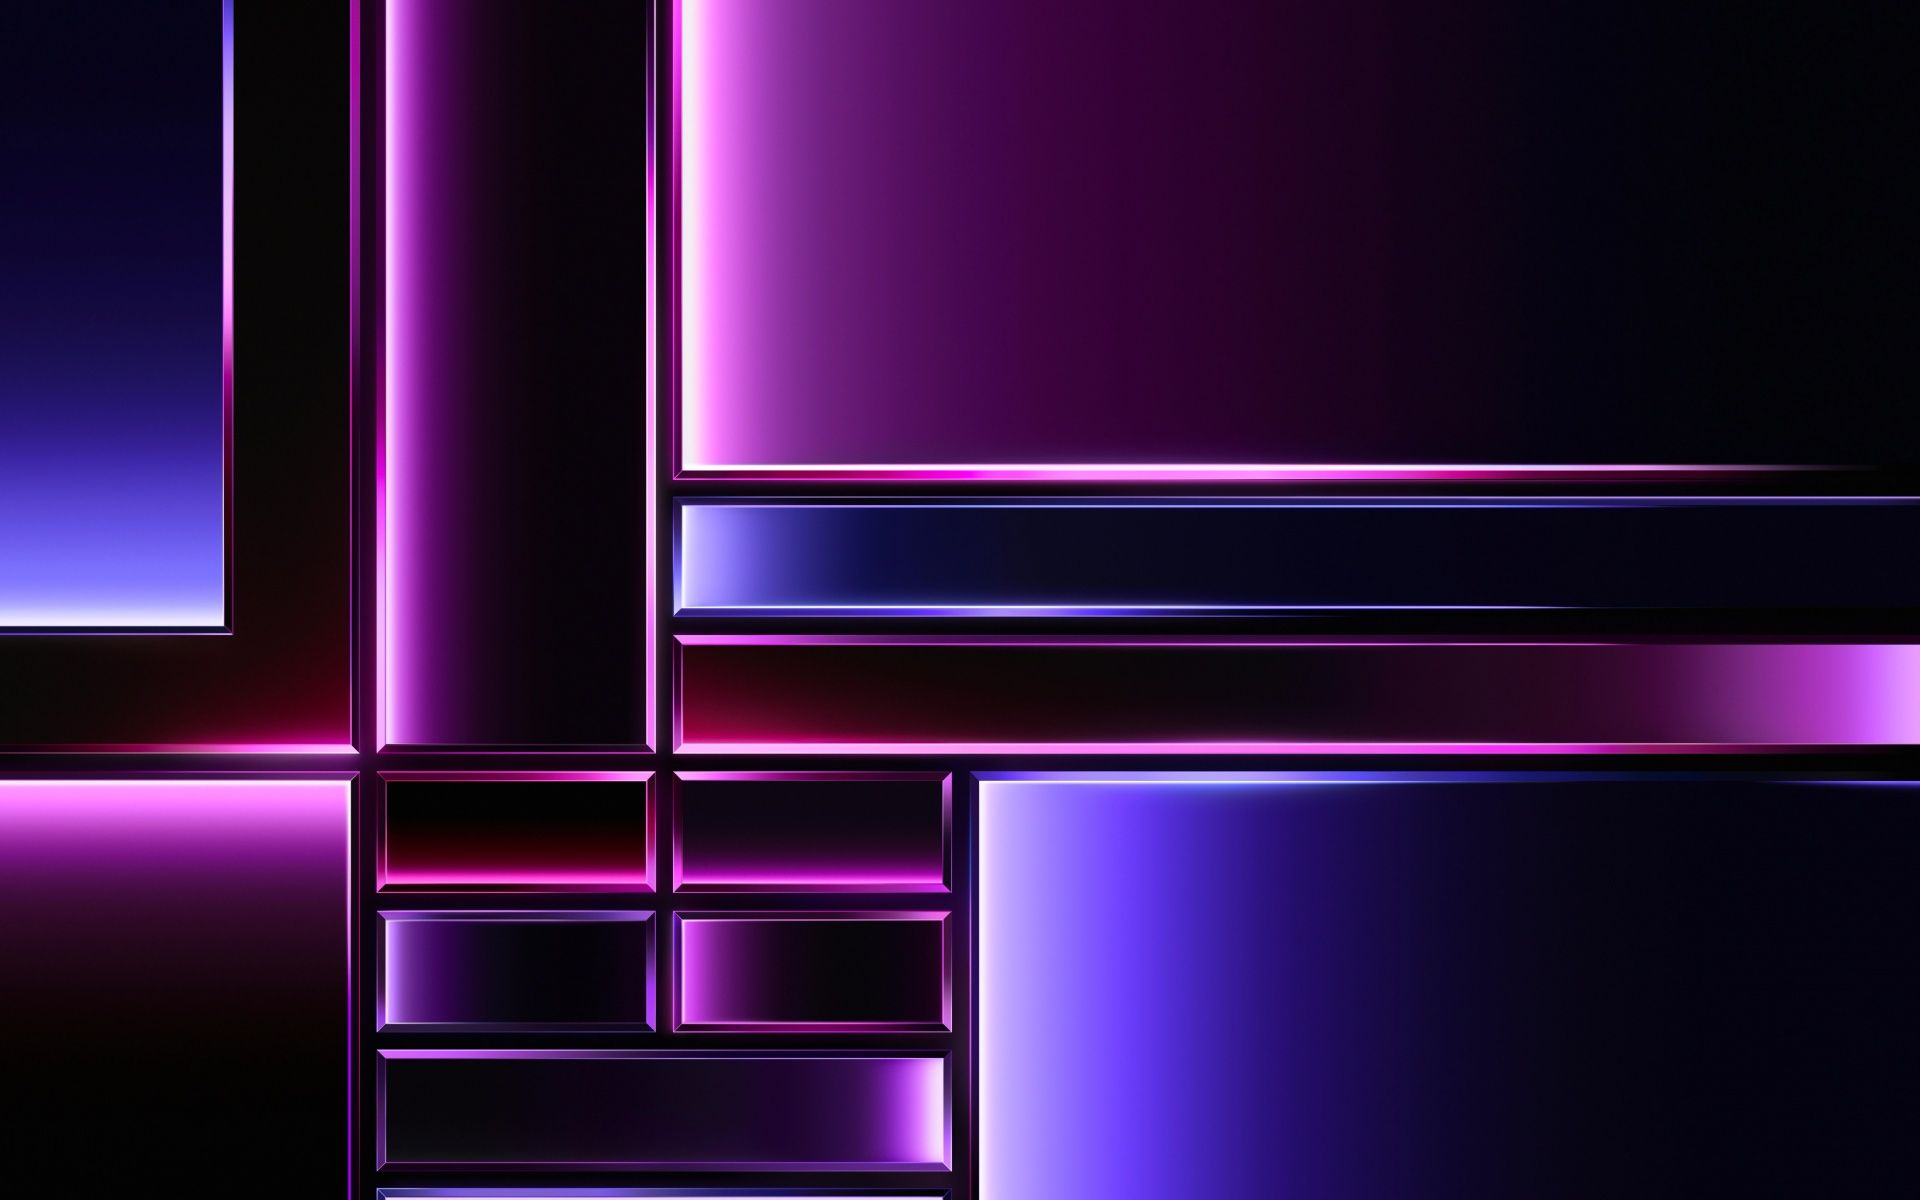 A purple and blue abstract wallpaper with a dark background - 1920x1200